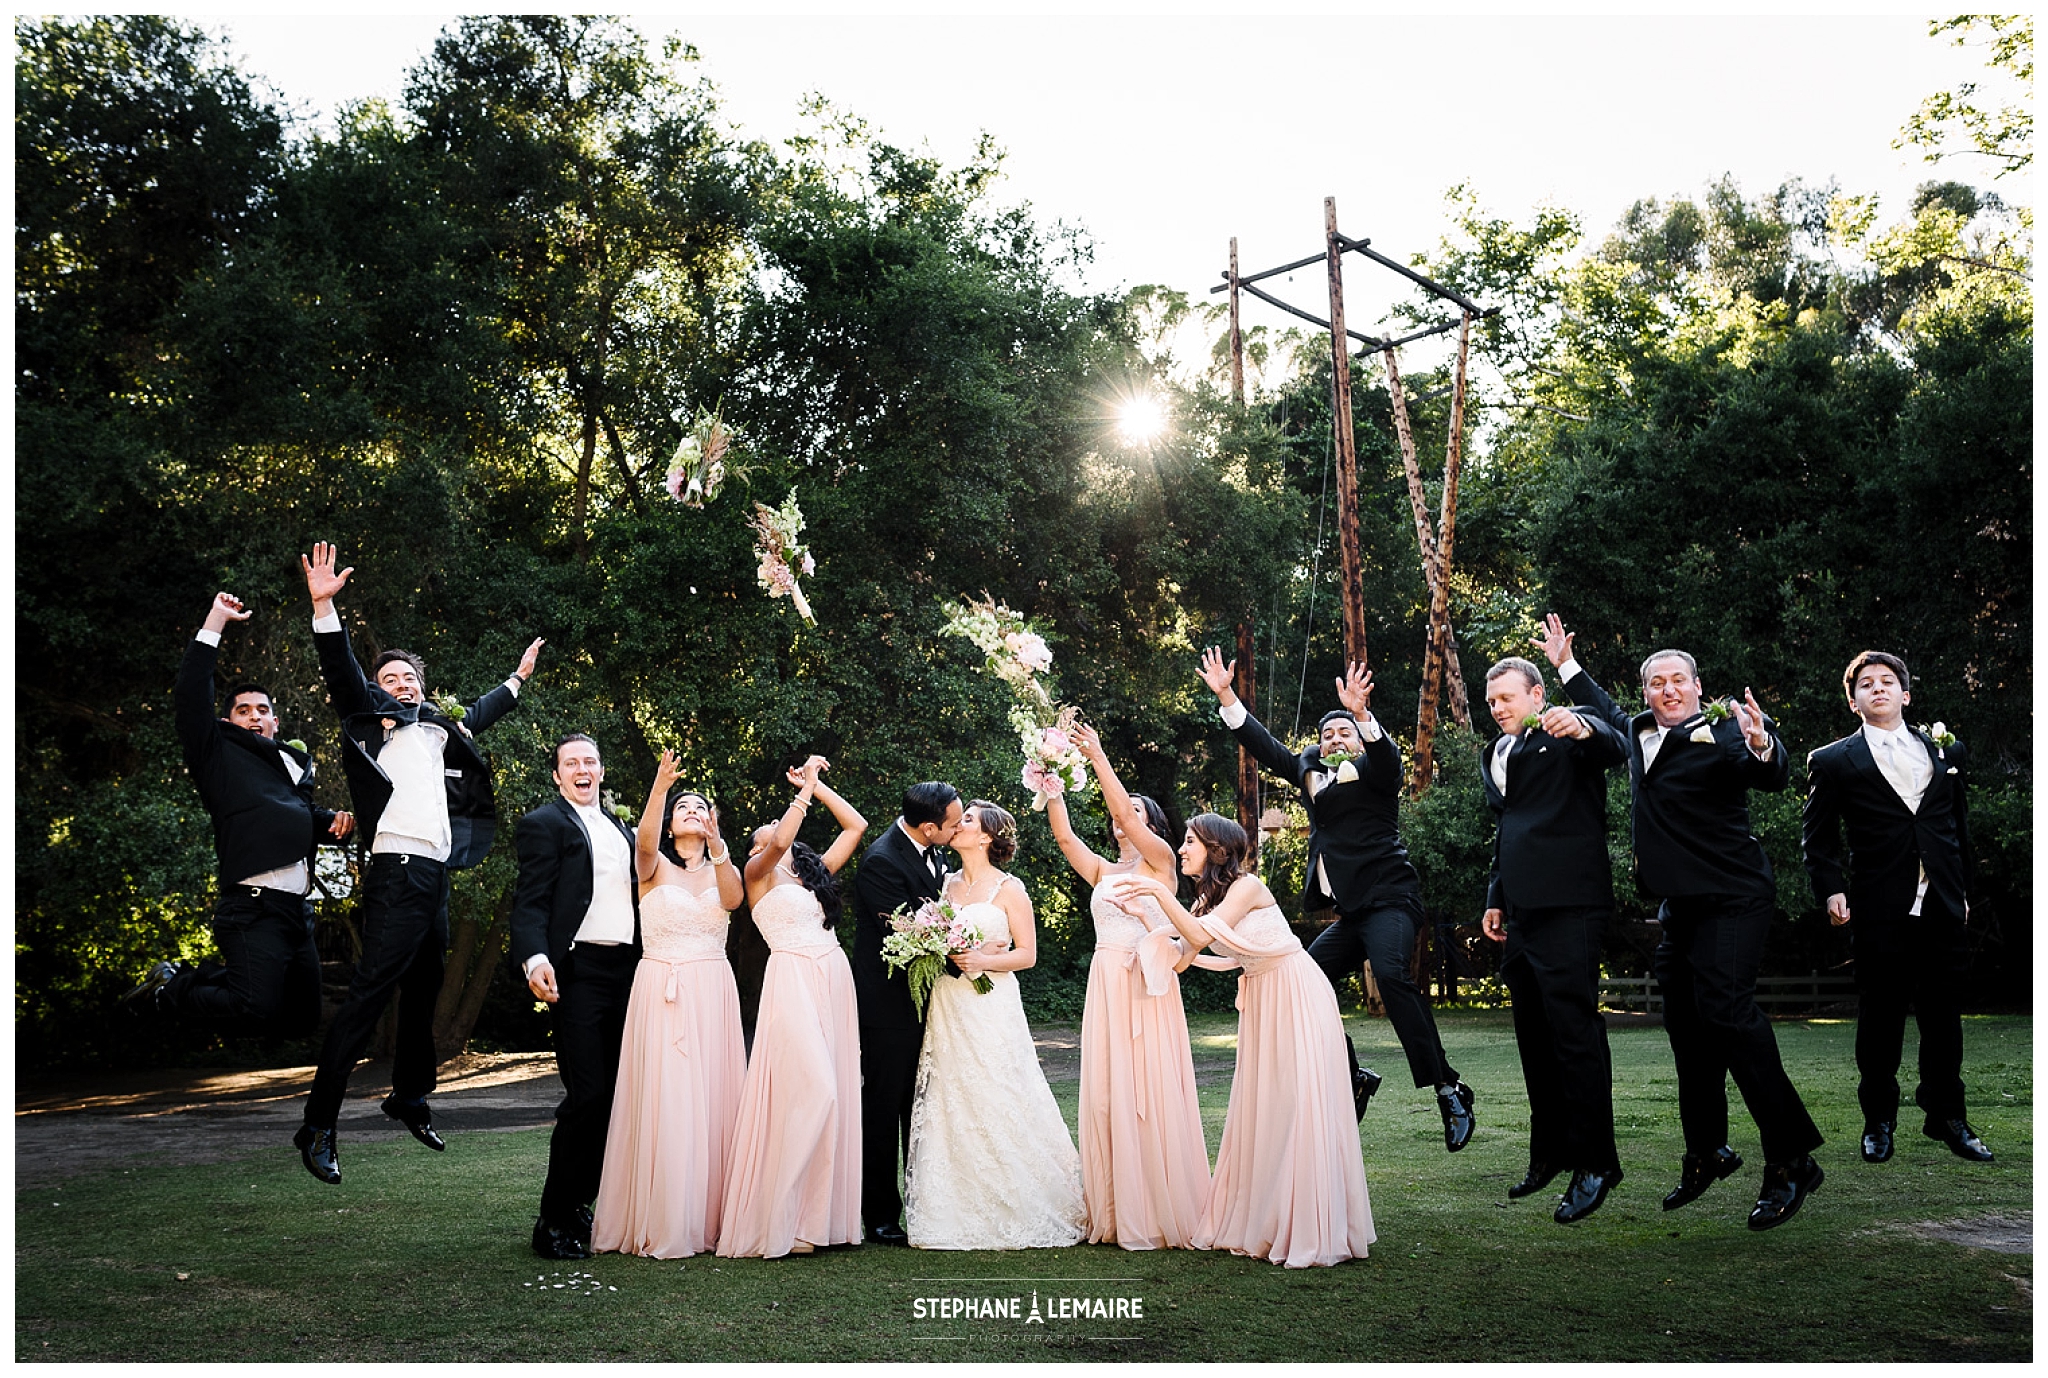 Calamigos Ranch bridal party portrait by Stephane Lemaire Photography 